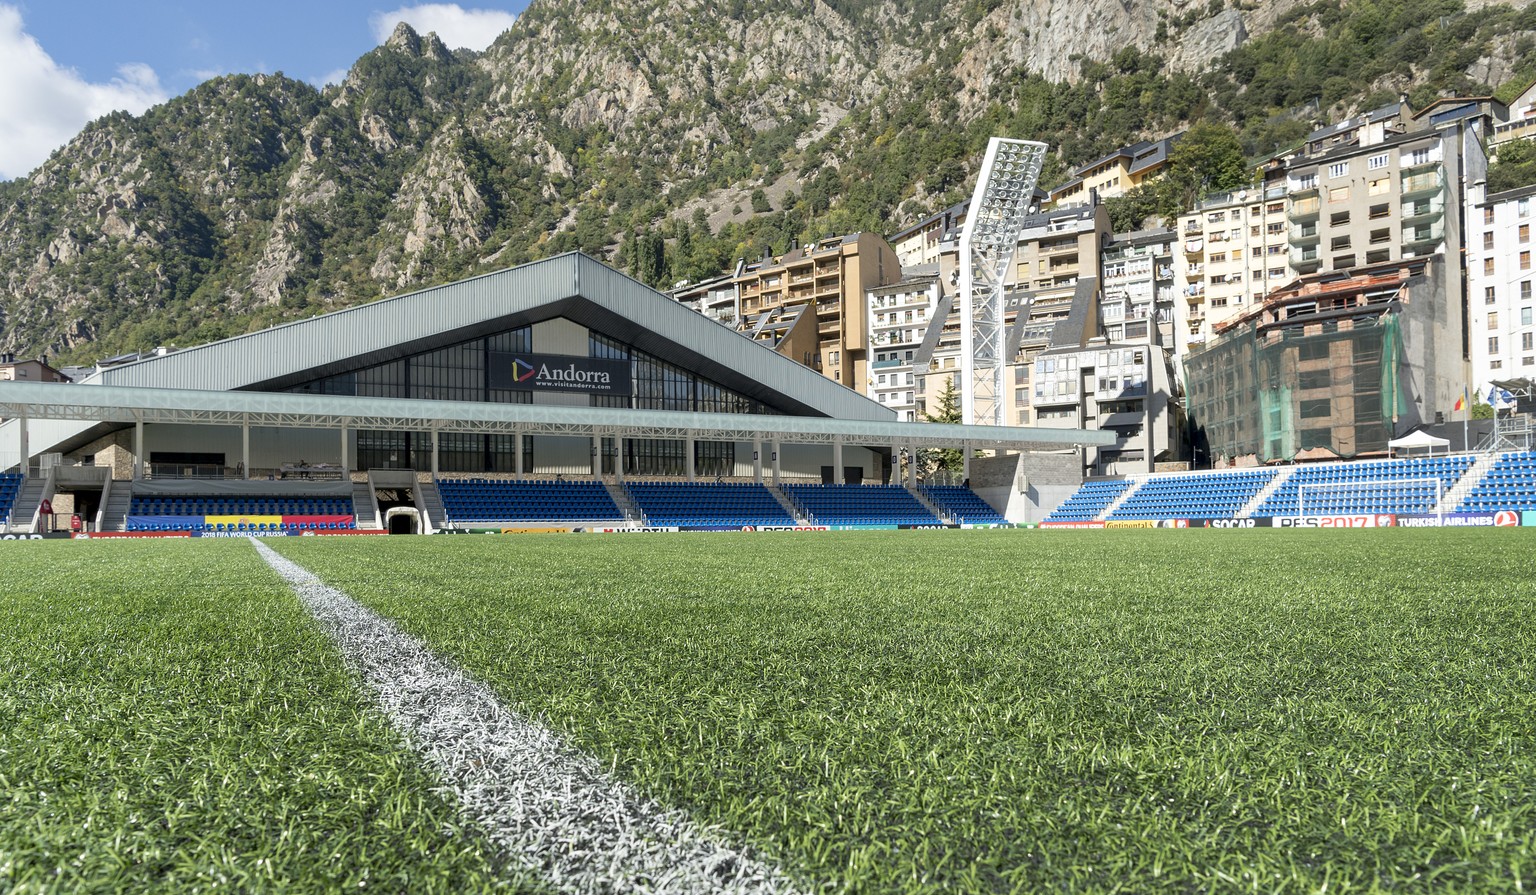 The Estadi Nacional in Andorra La Vella in Andorra, Sunday, October 9, 2016. Switzerland is scheduled to play a 2018 Fifa World Cup Russia group B qualification soccer match against Andorra on Monday, ...